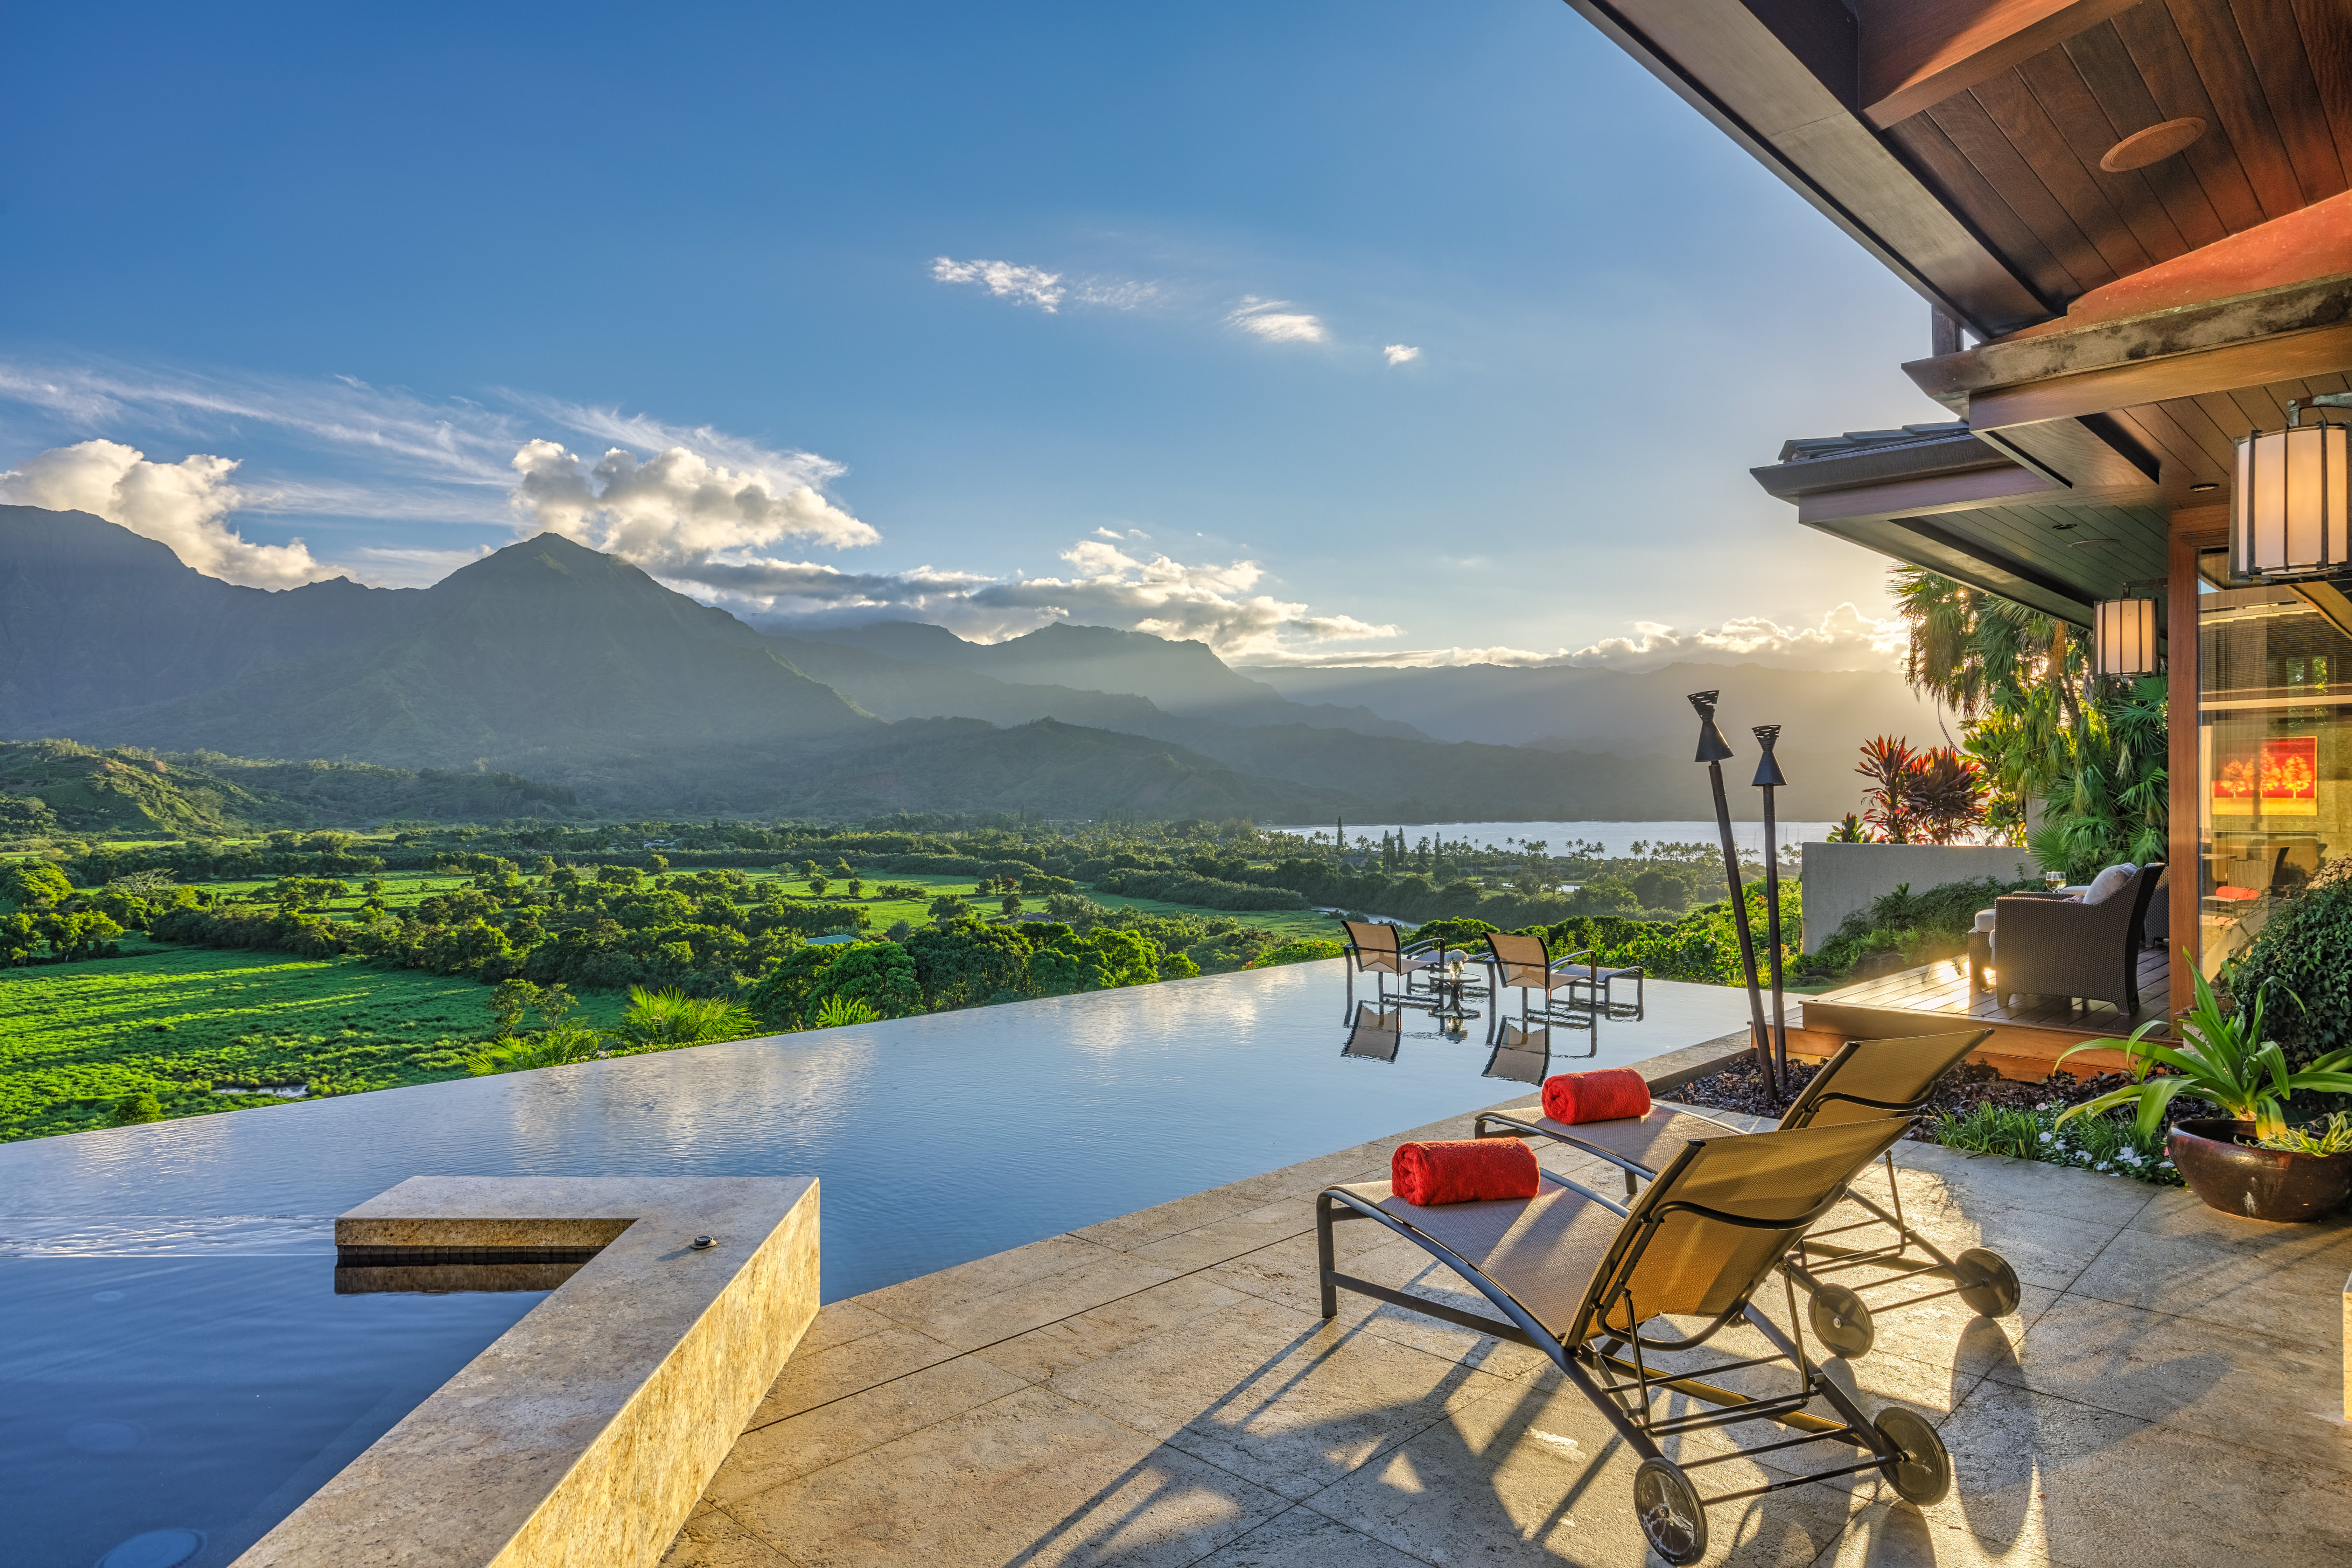 Hawaii’s ultra-luxe real estate is smashing records. Here’s what’s selling